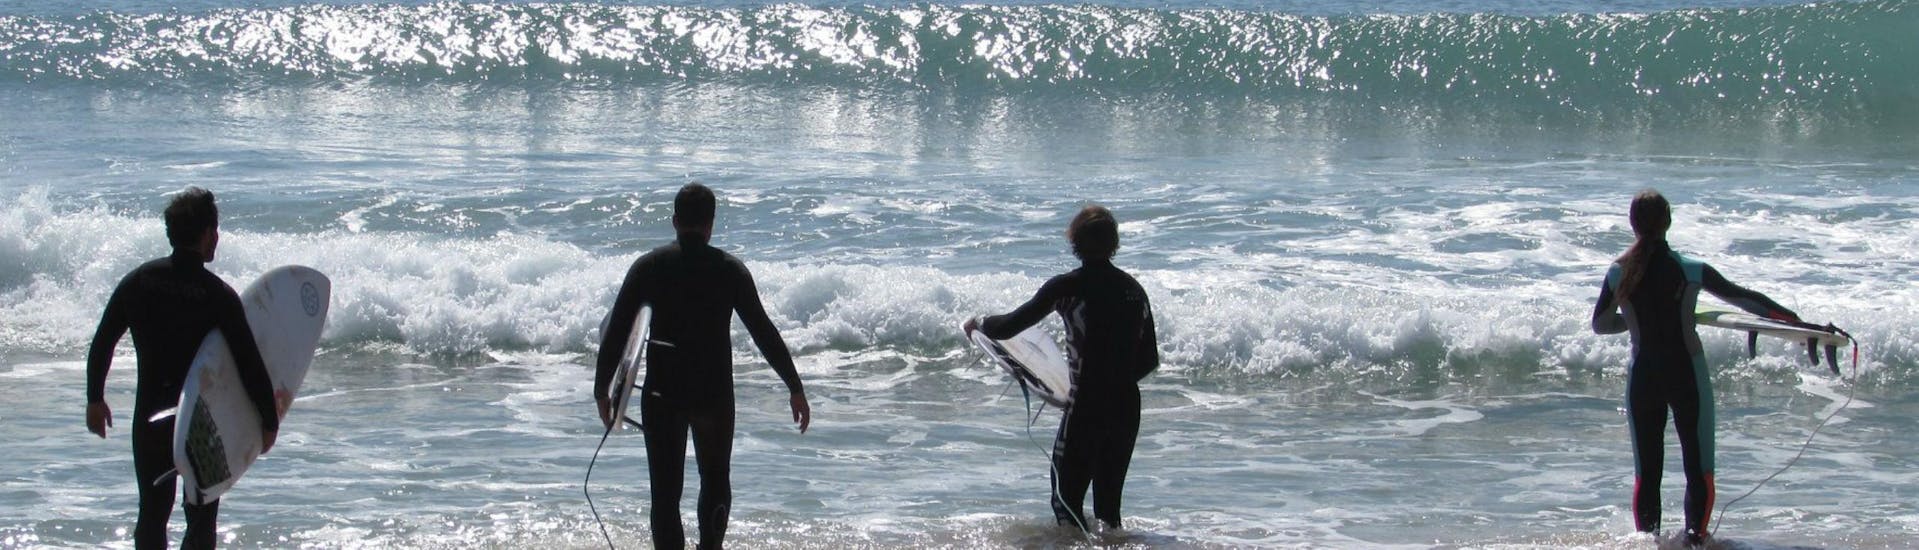 Four guys standing in the sea during surfing Lessons for Kids & Adults all Levels with Zambeachouse Lourinhã.